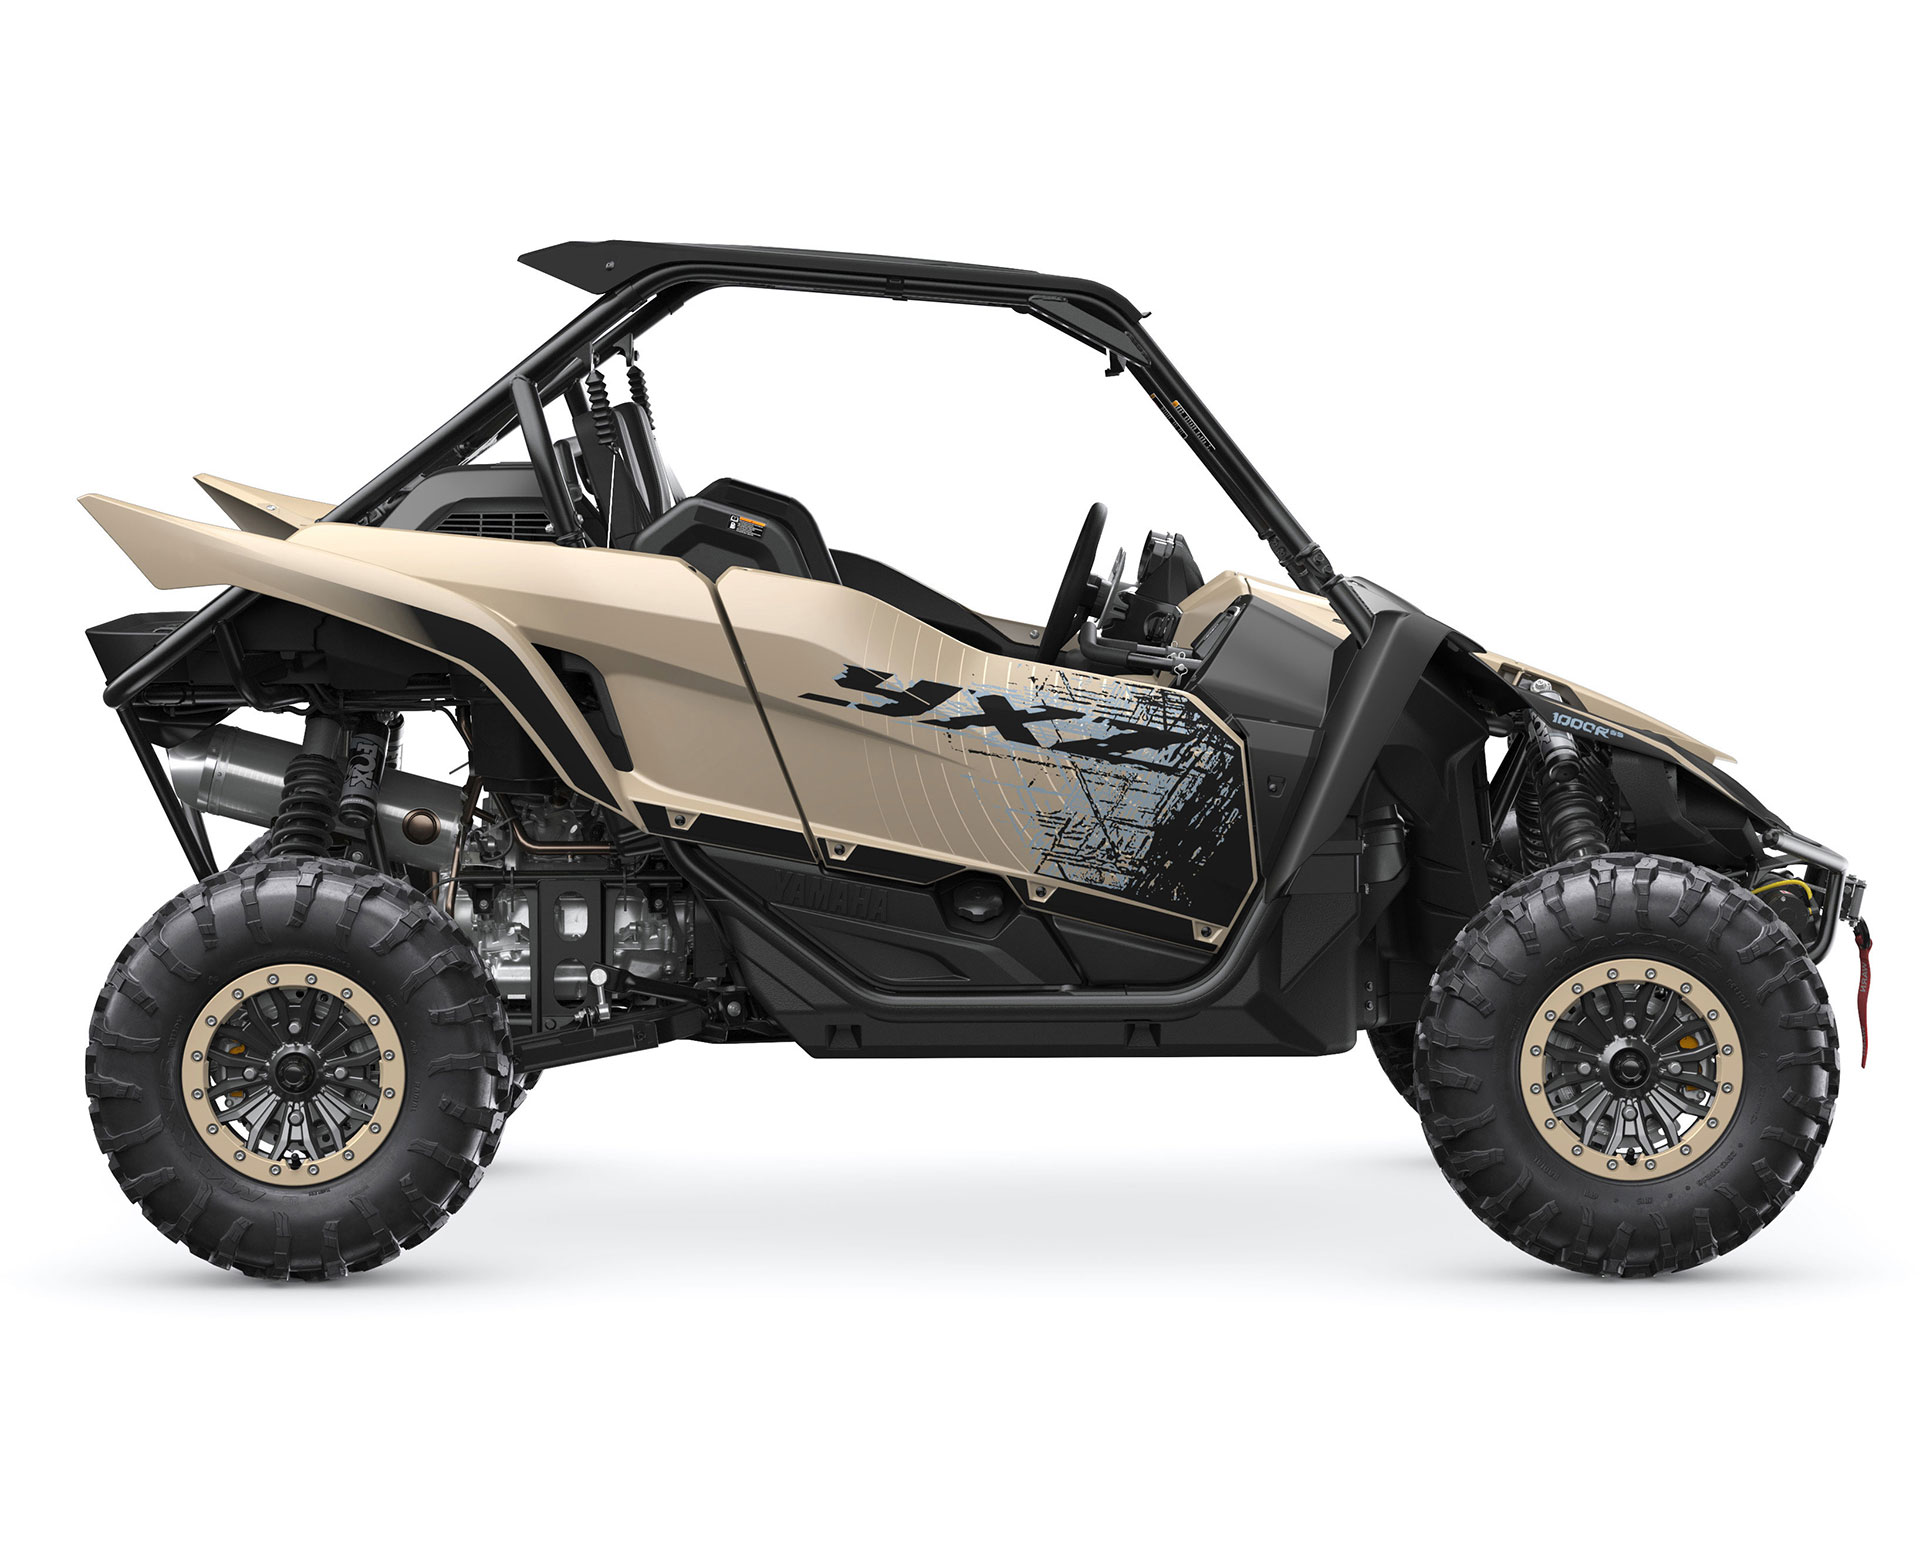 Thumbnail of your customized YXZ1000R SS SE 2023